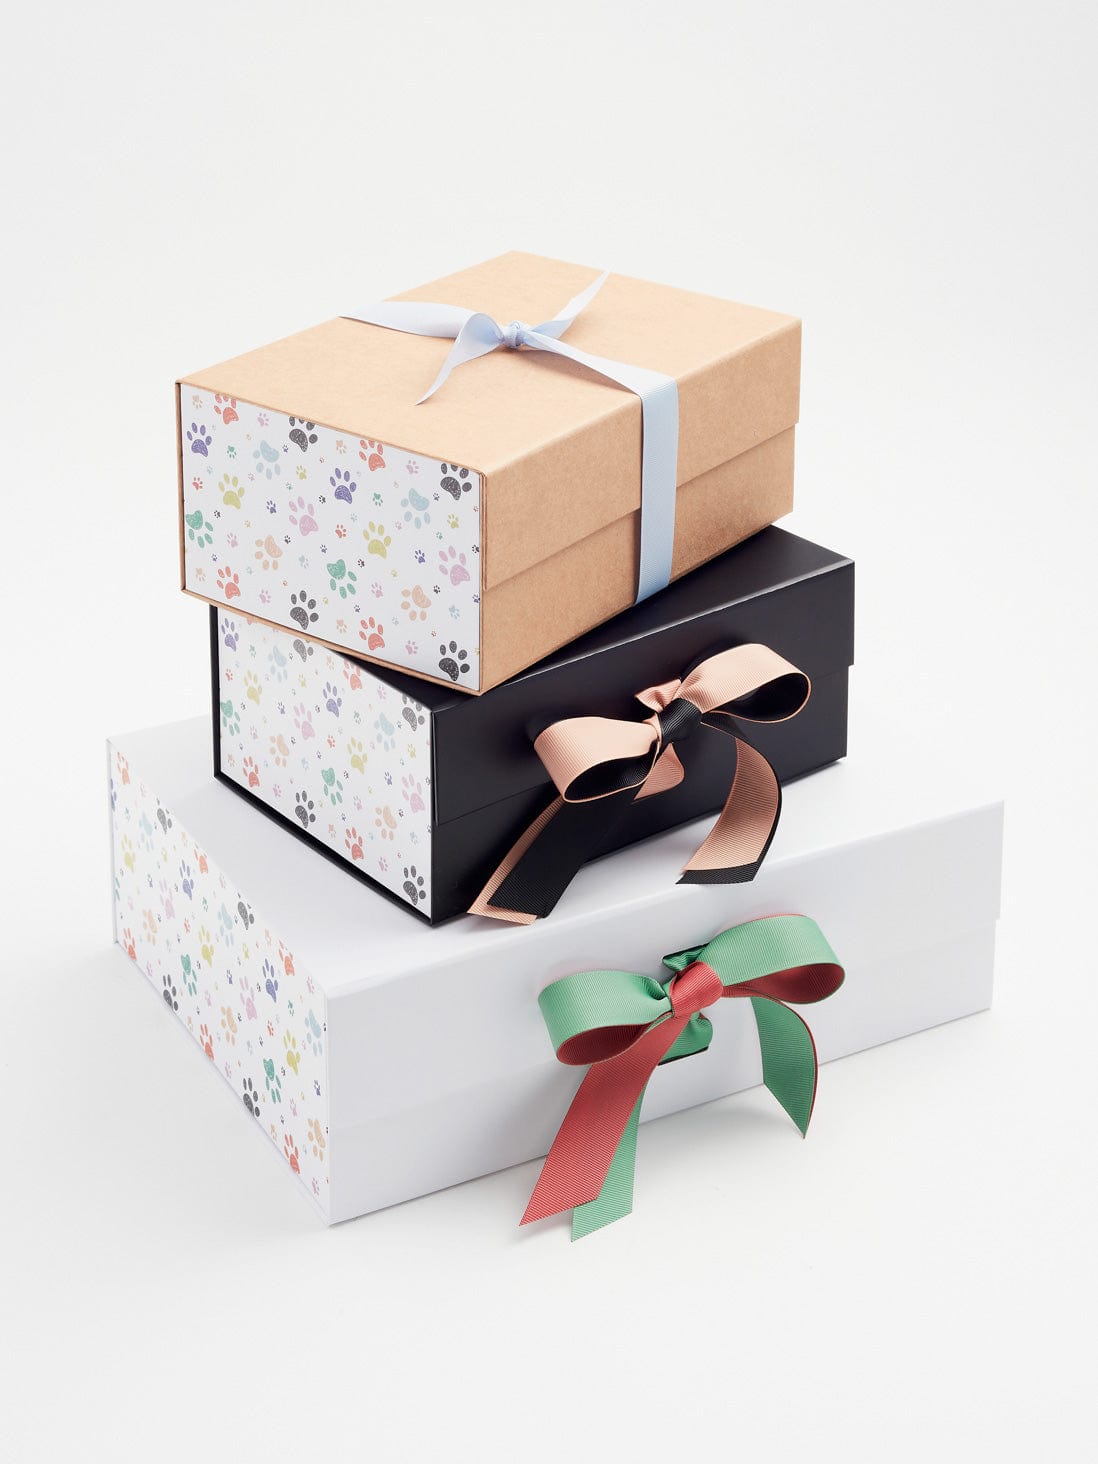 Give the gift of fashion rental with a Dressr giftbox